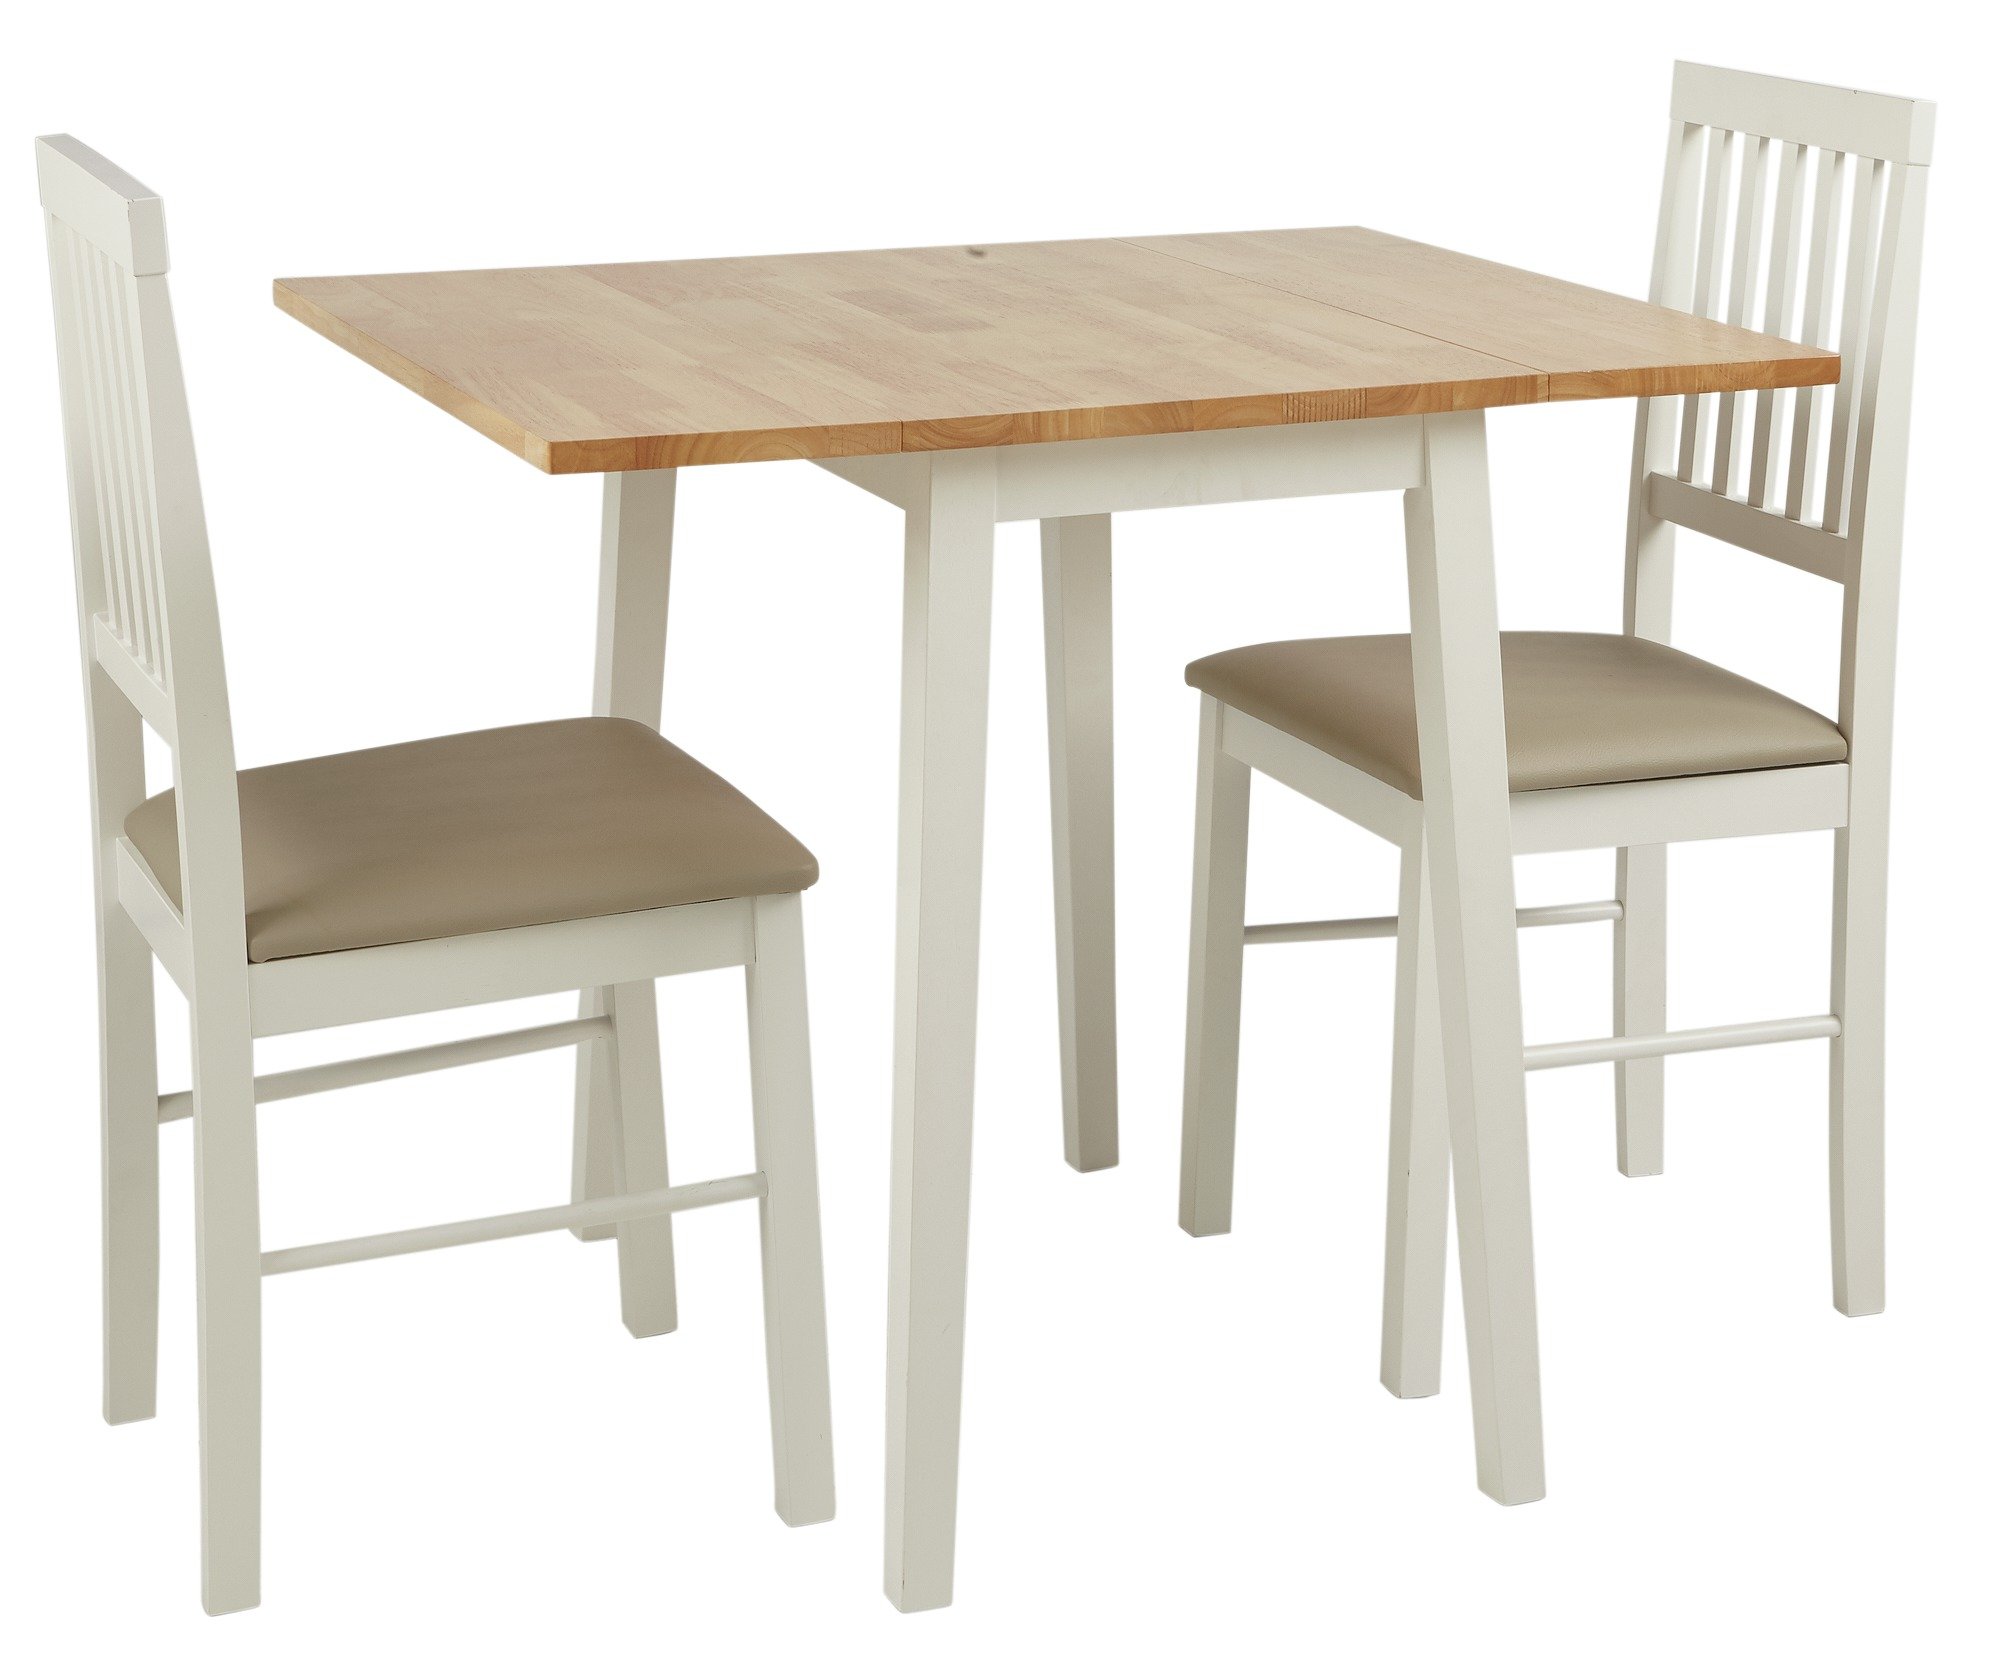 Argos Home Kendal Extendable Wood Table & 2 Chairs -Two Tone review